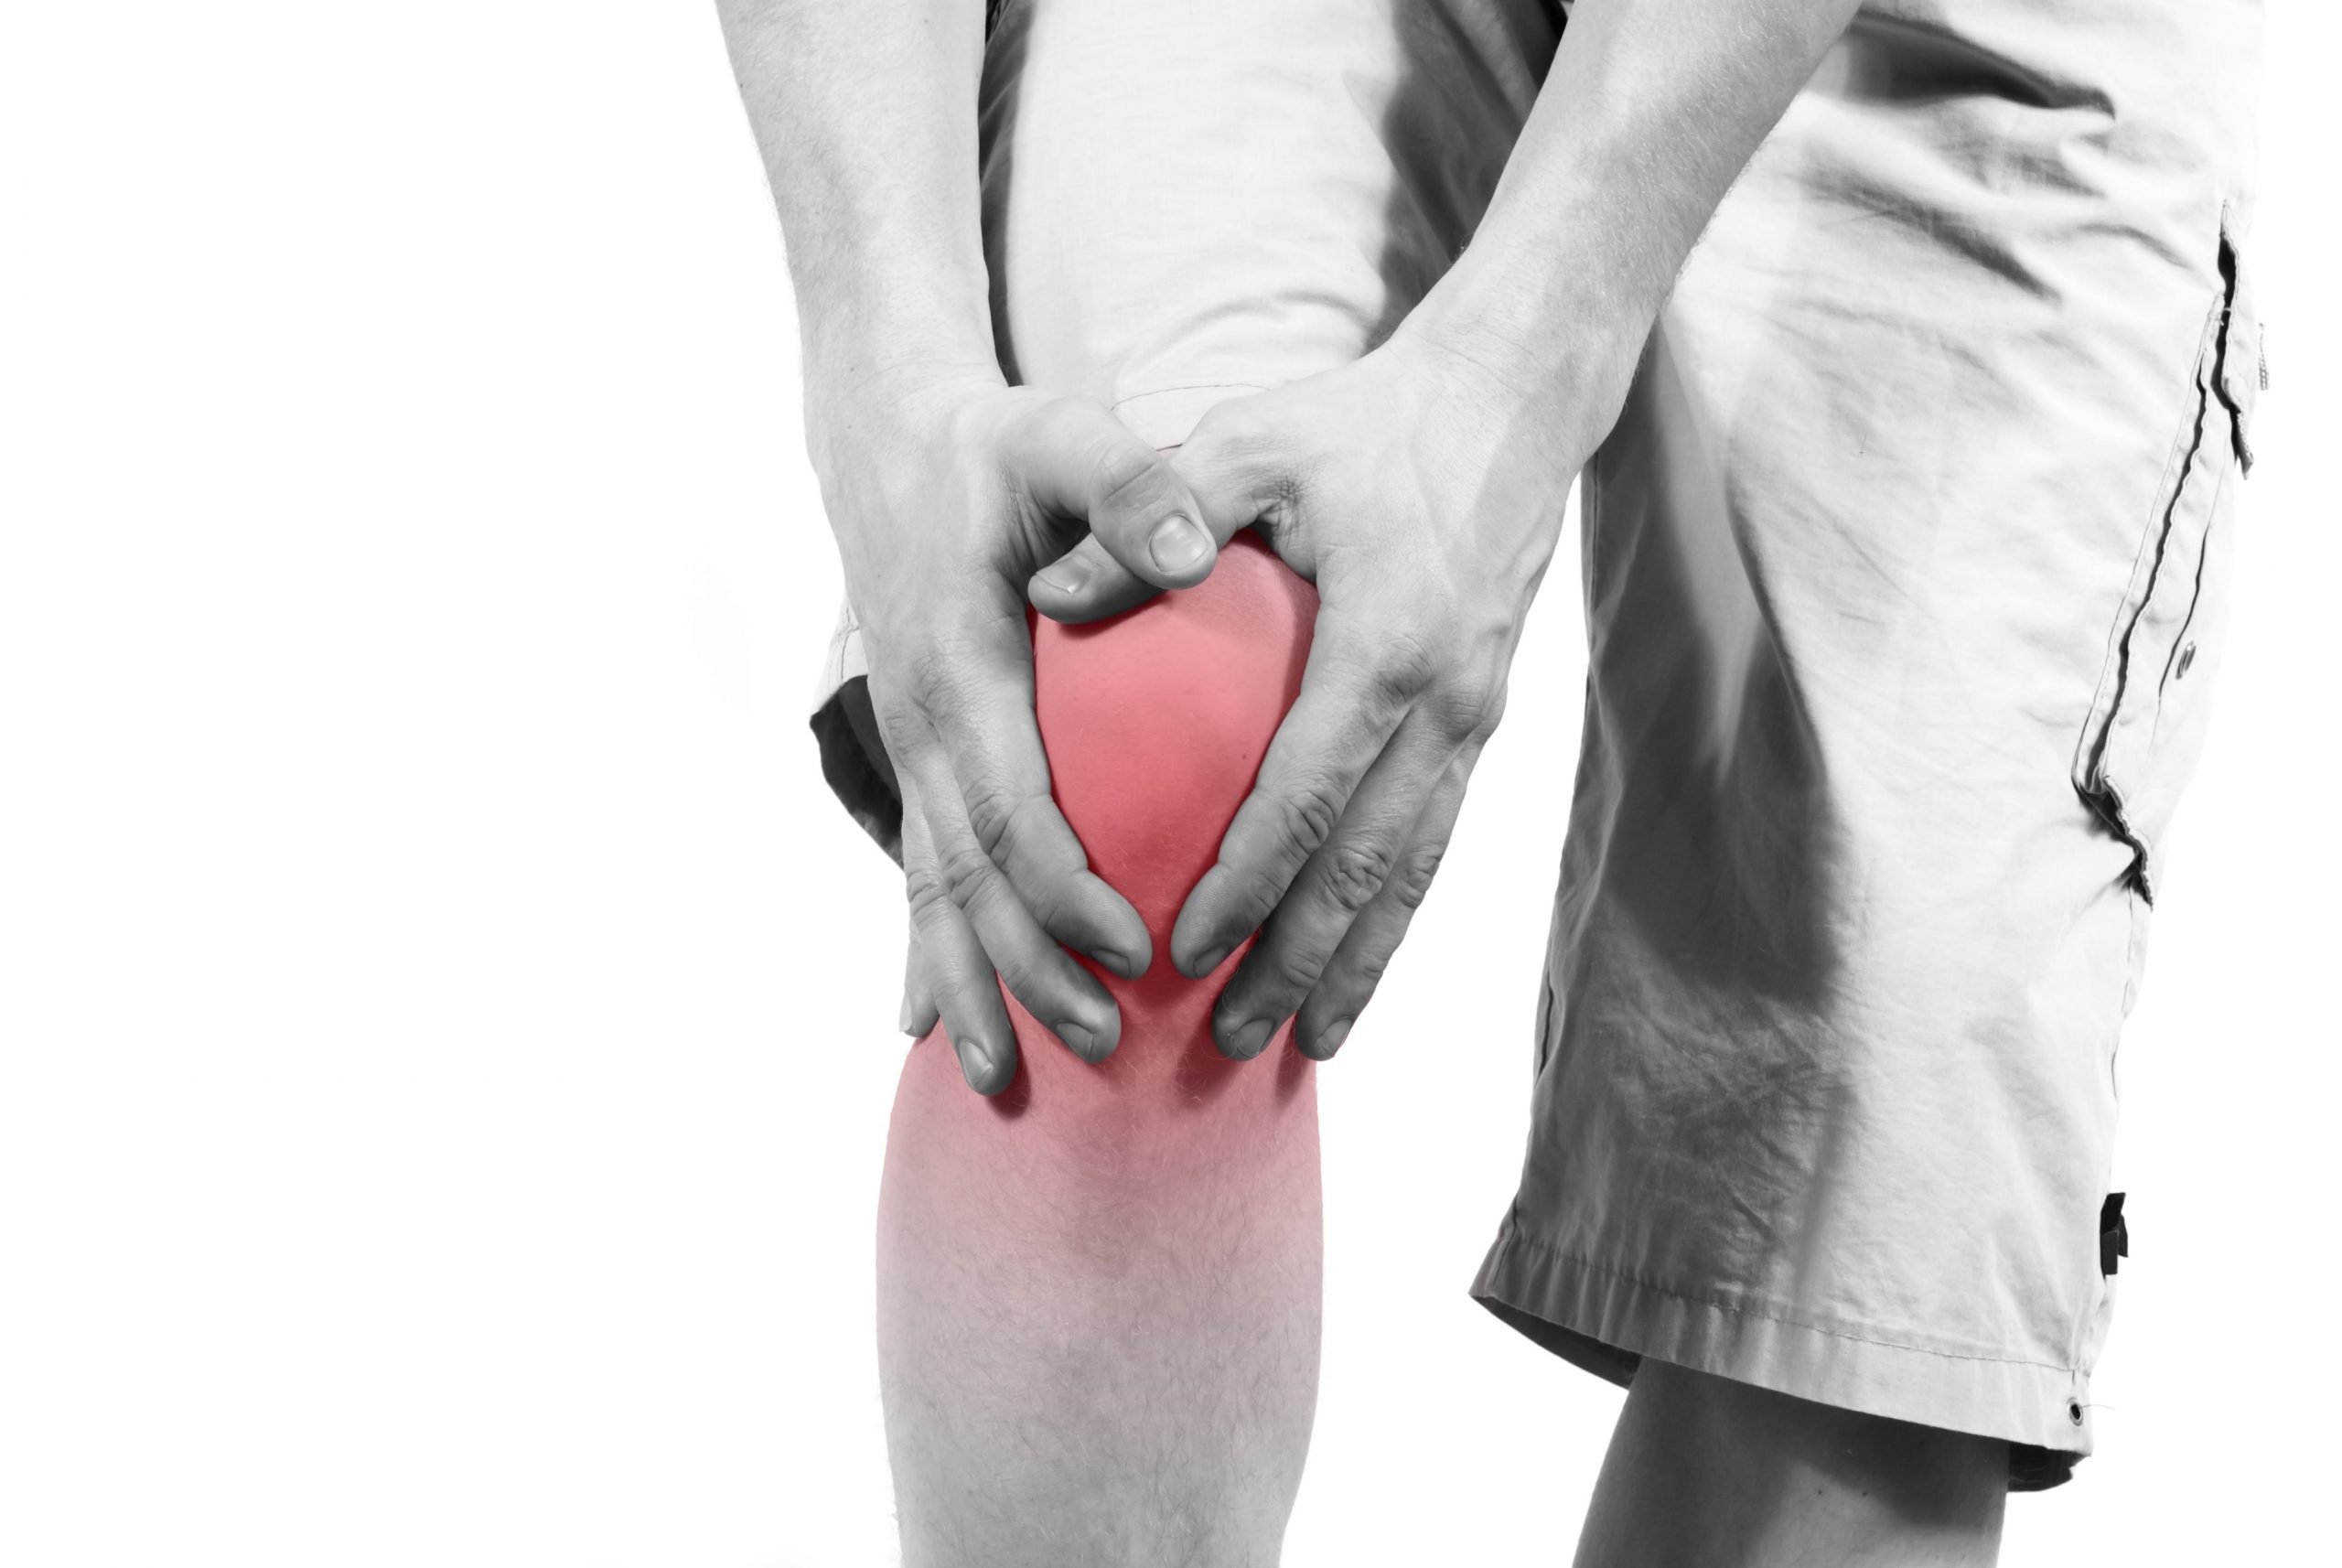 The Effect of Altered Pain Perception in Knee Osteoarthritis